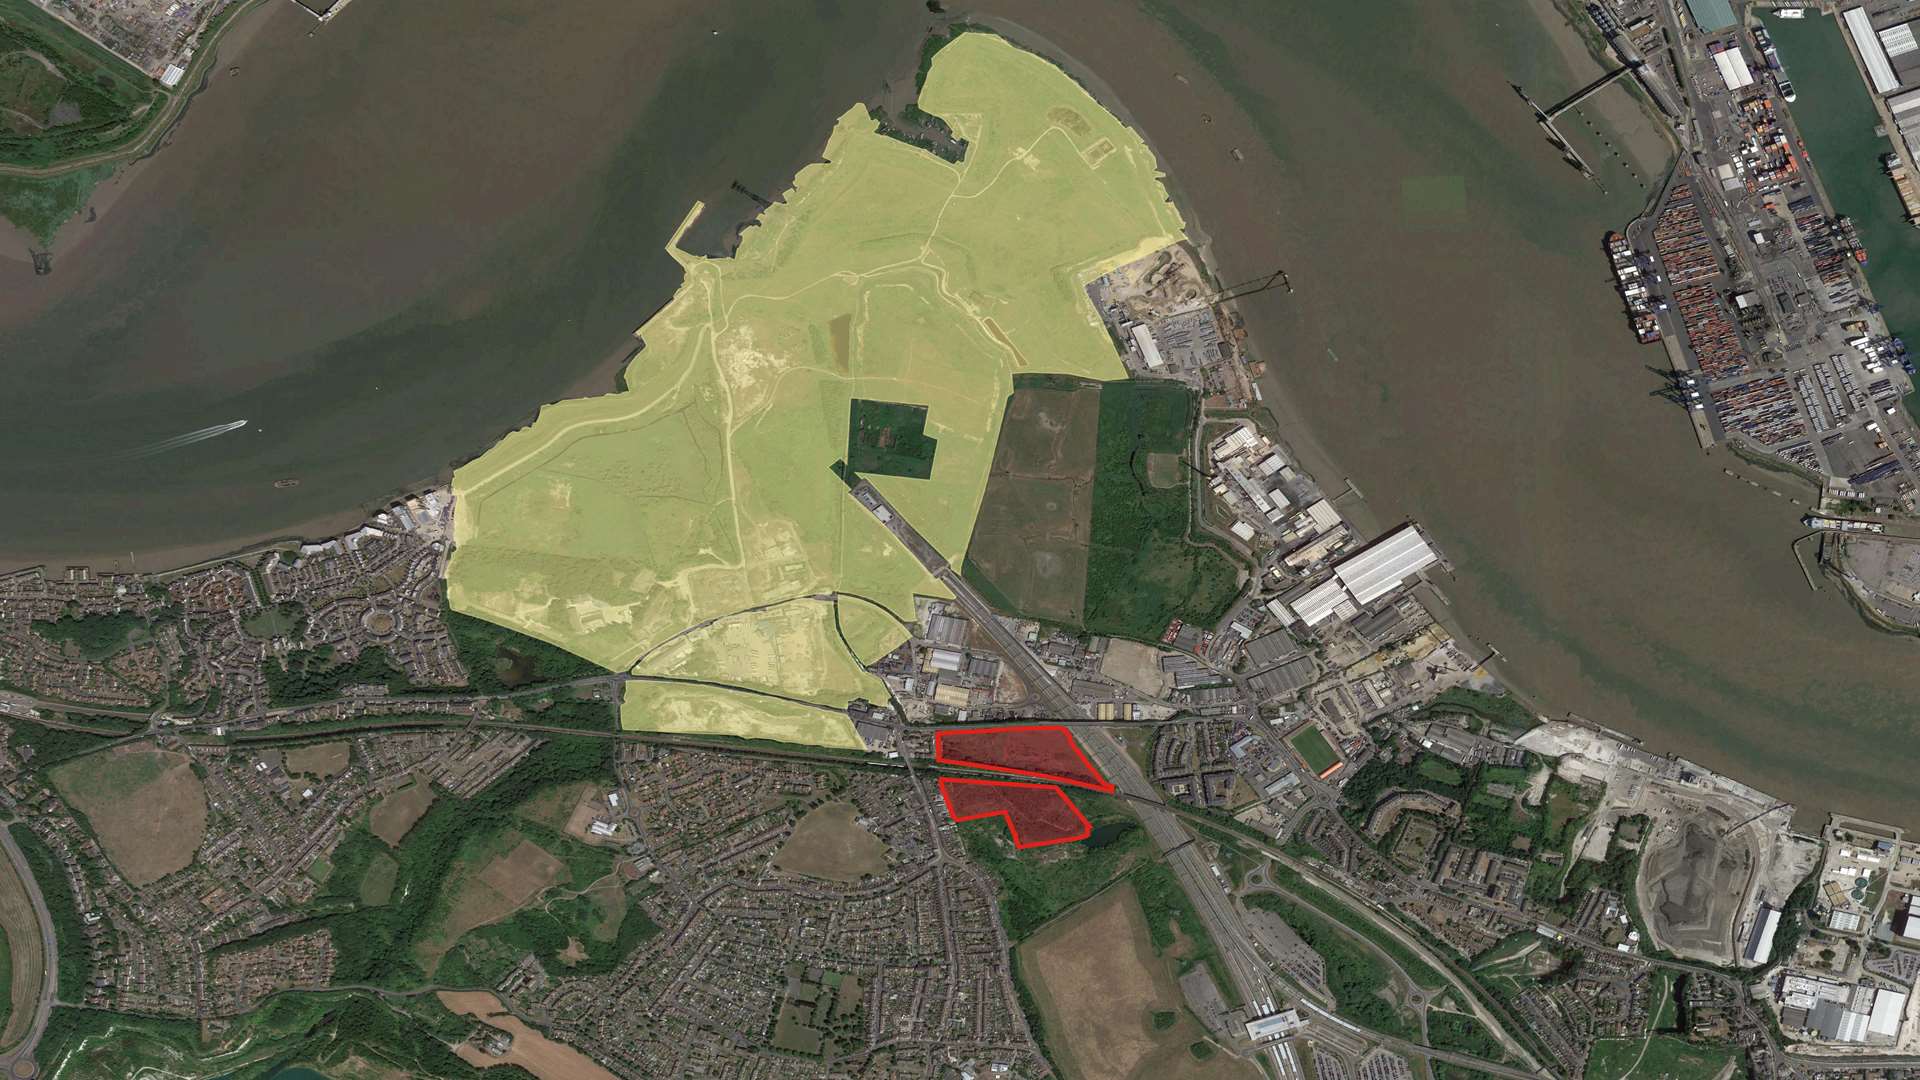 The Bamber Pit and Sports Ground in red has been bought by London Paramount, while the land oin green it has an agreement to purchase from Lafarge Tarmac